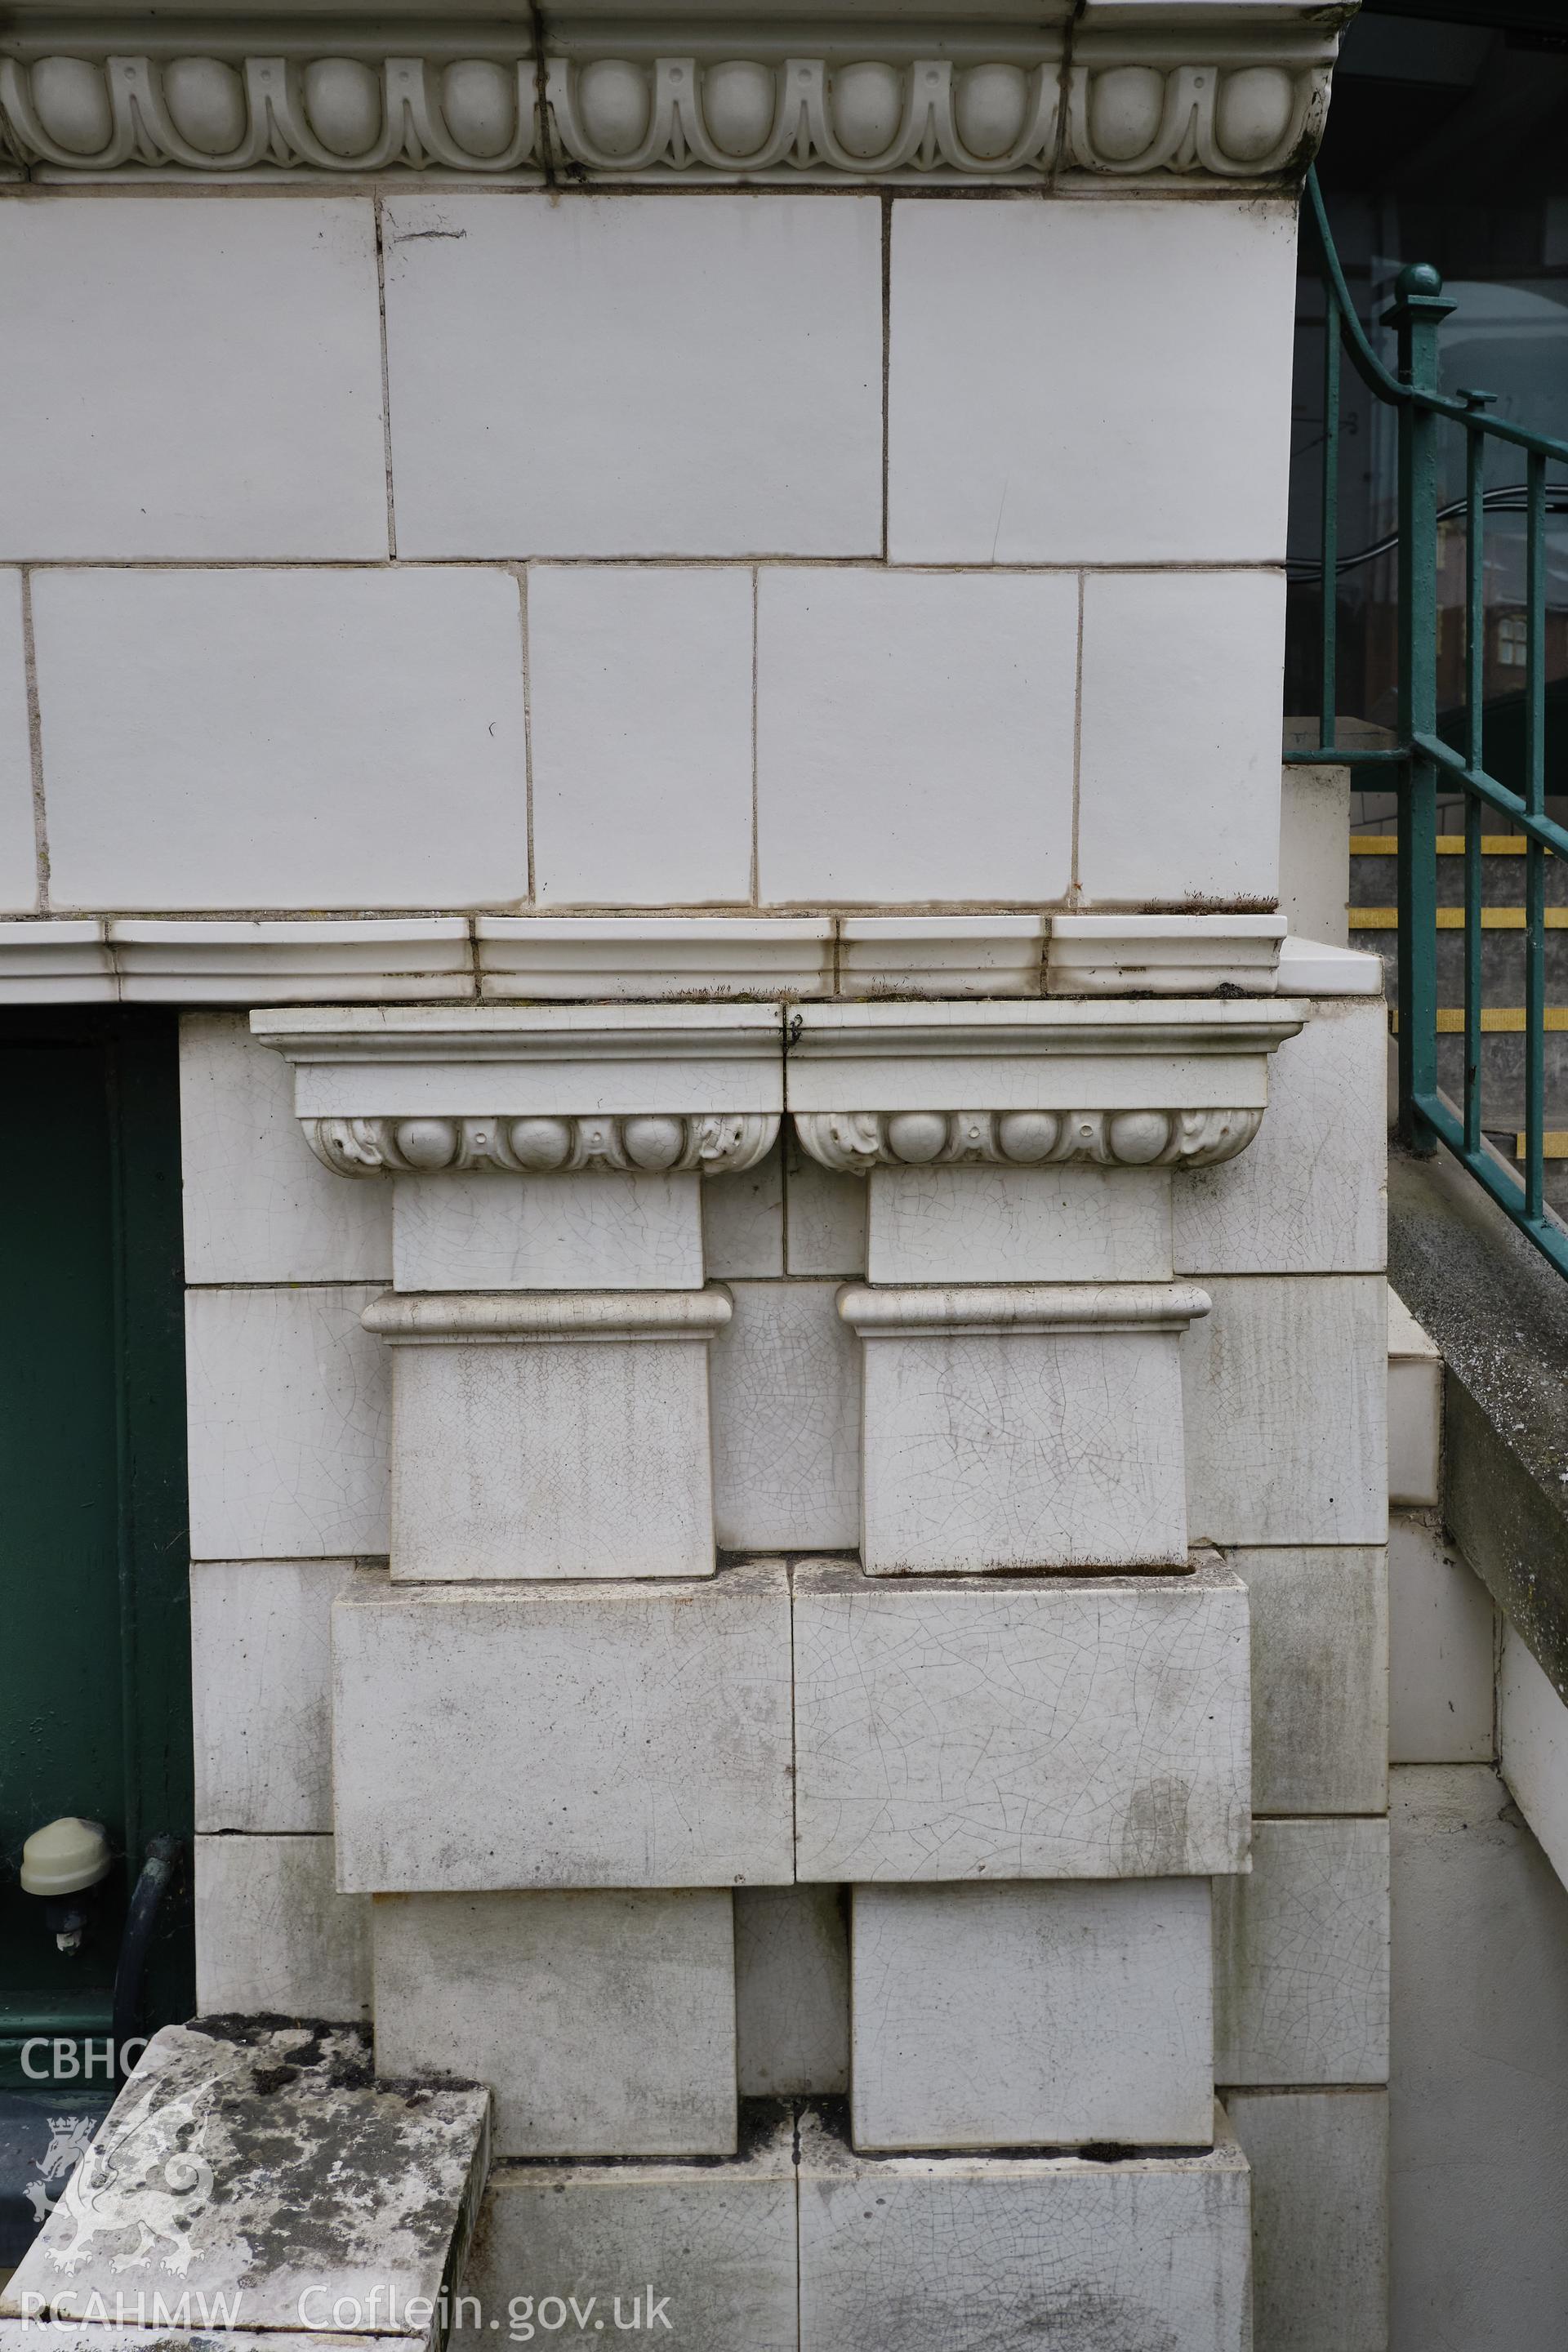 Colour photograph showing Automobile Palace - pilaster and fascia detail, Princes Avenue front. Produced as part of Historic Building Recording for Automobile Palace, carried out by Richard Hayman, June 2021.